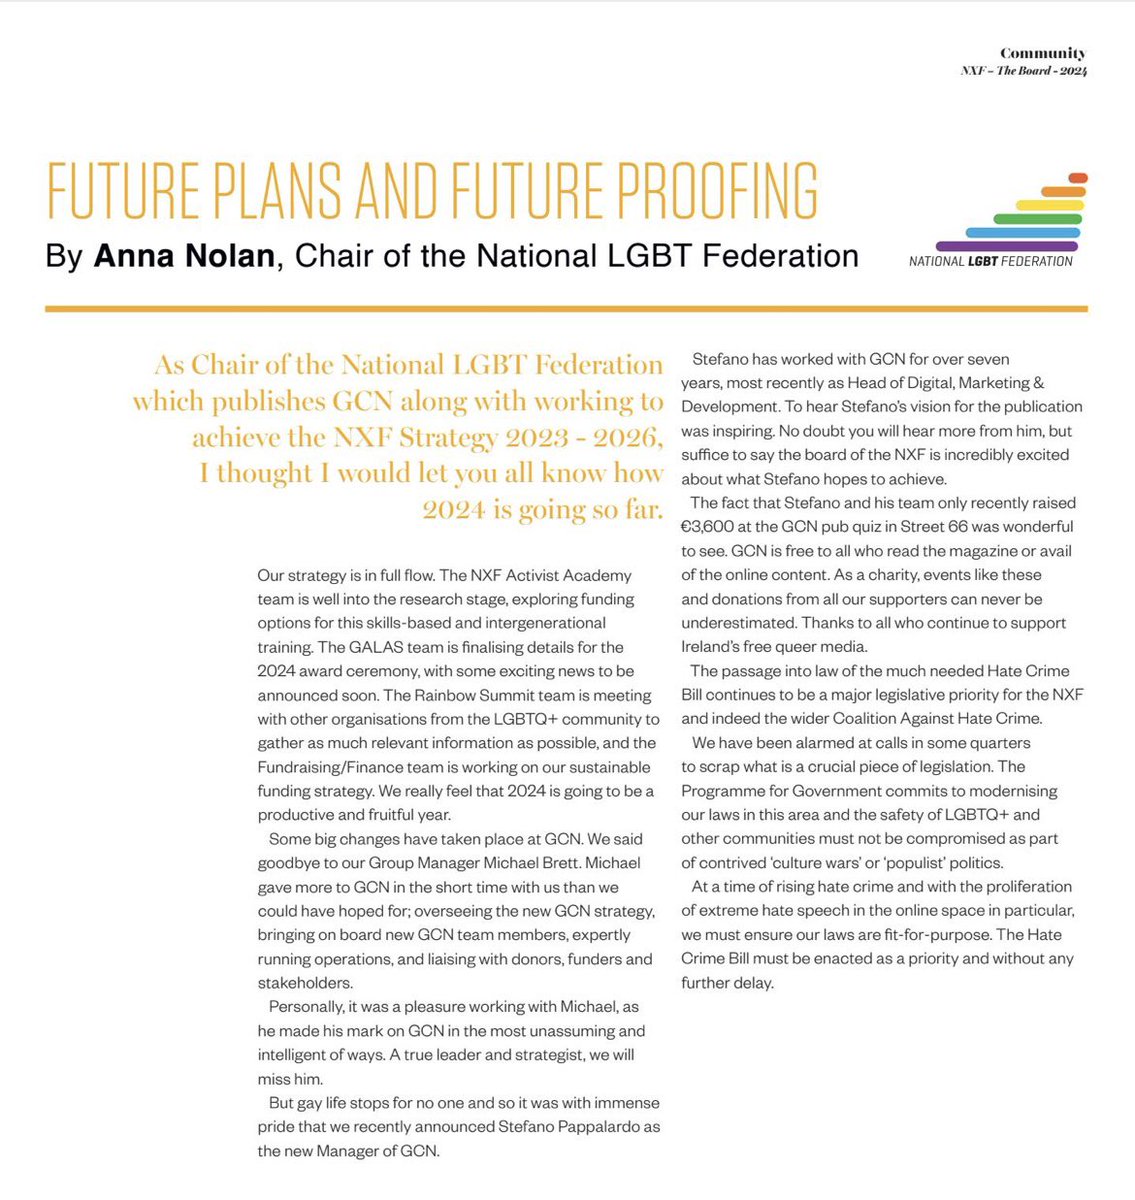 Writing in this month’s @GCNmag our chair @annanolan70 outlines some of the key work we are progressing. #AlotDoneMoreToDo 🏳️‍🌈🏳️‍⚧️